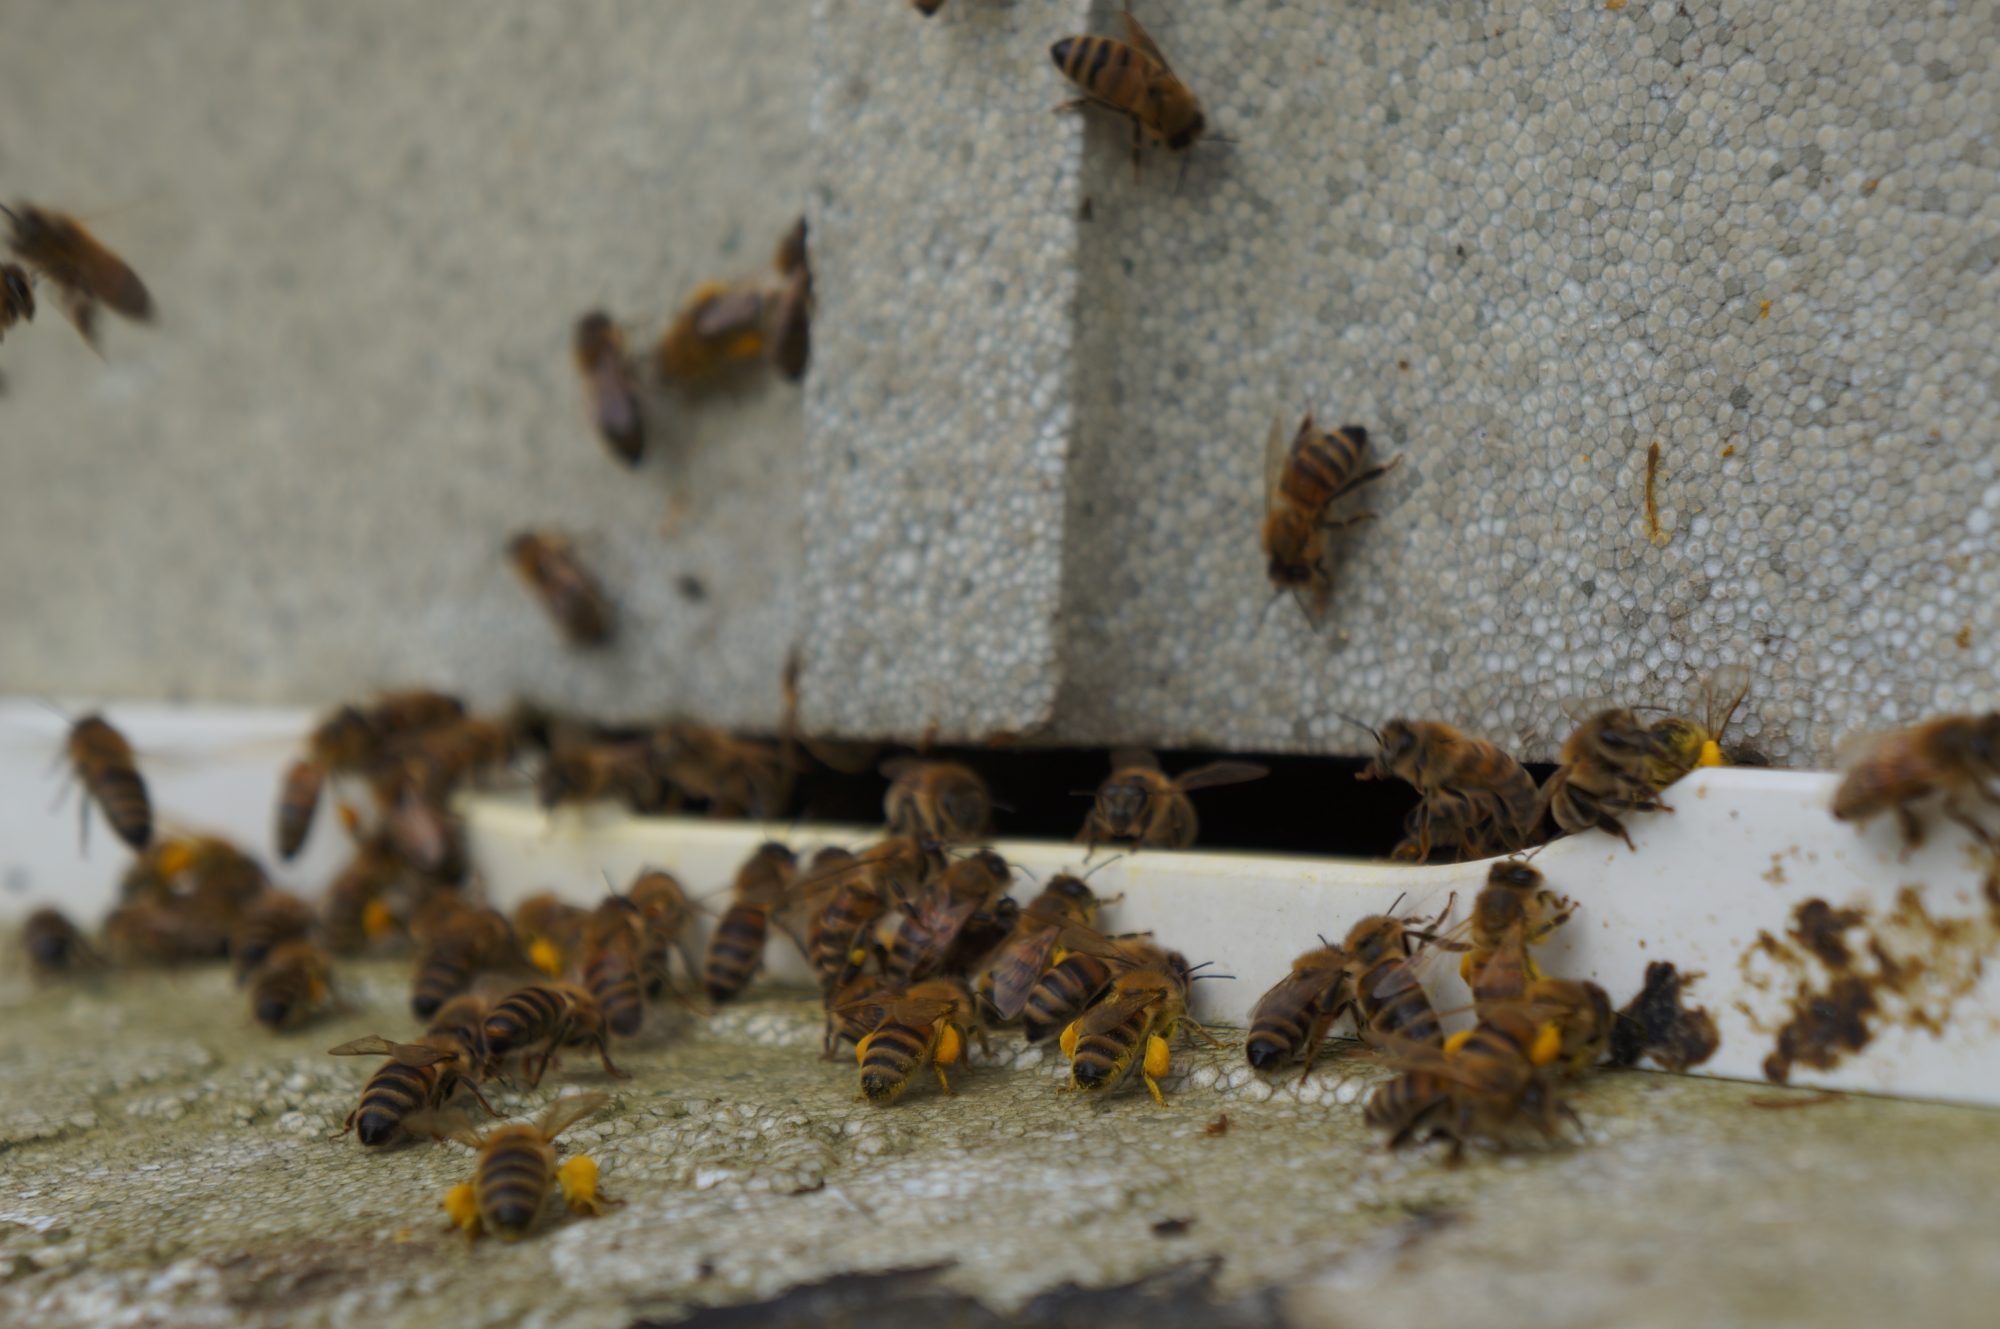 March 17 Bees queuing up to get into the hive with their full polln payload